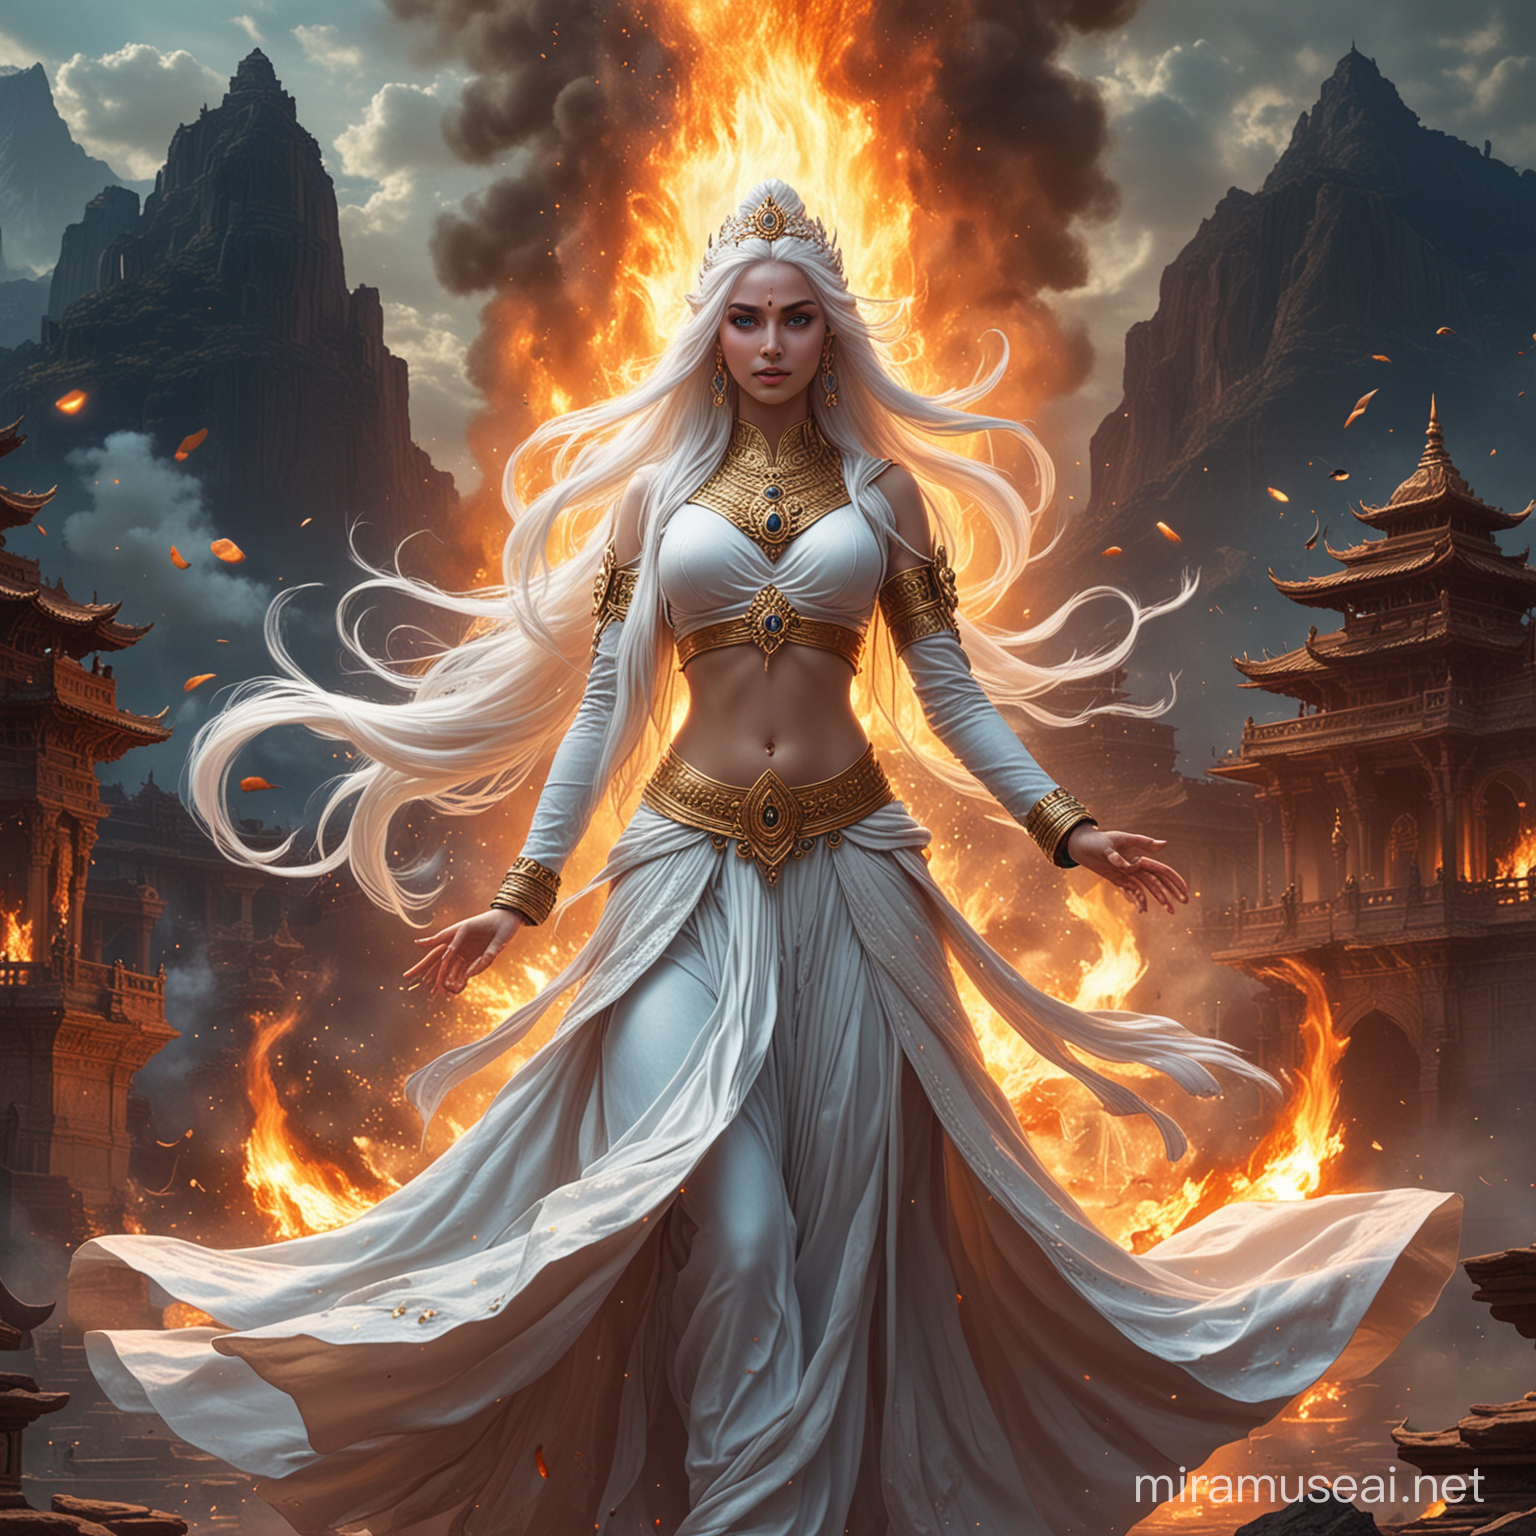 Powerful Hindu Empress Conjuring Flames with Demon Goddesses in Dark Palace